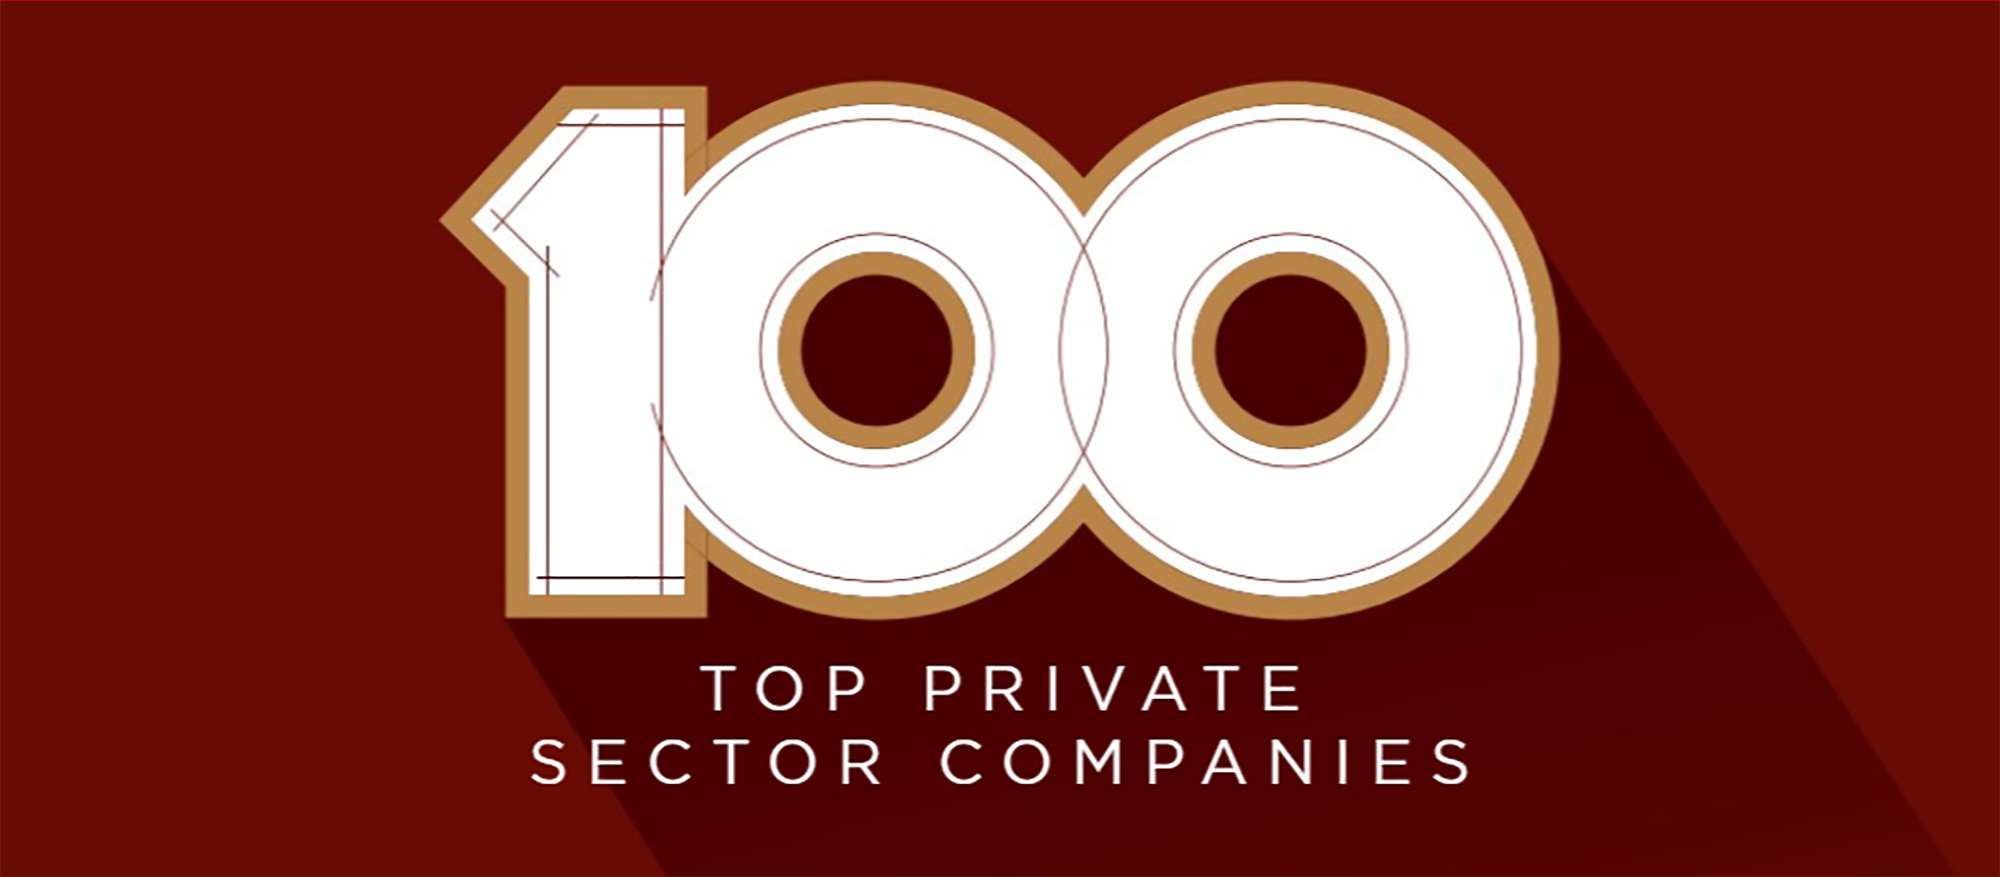 DH Pace Listed #41 in Ingram’s Top 100 Private Companies